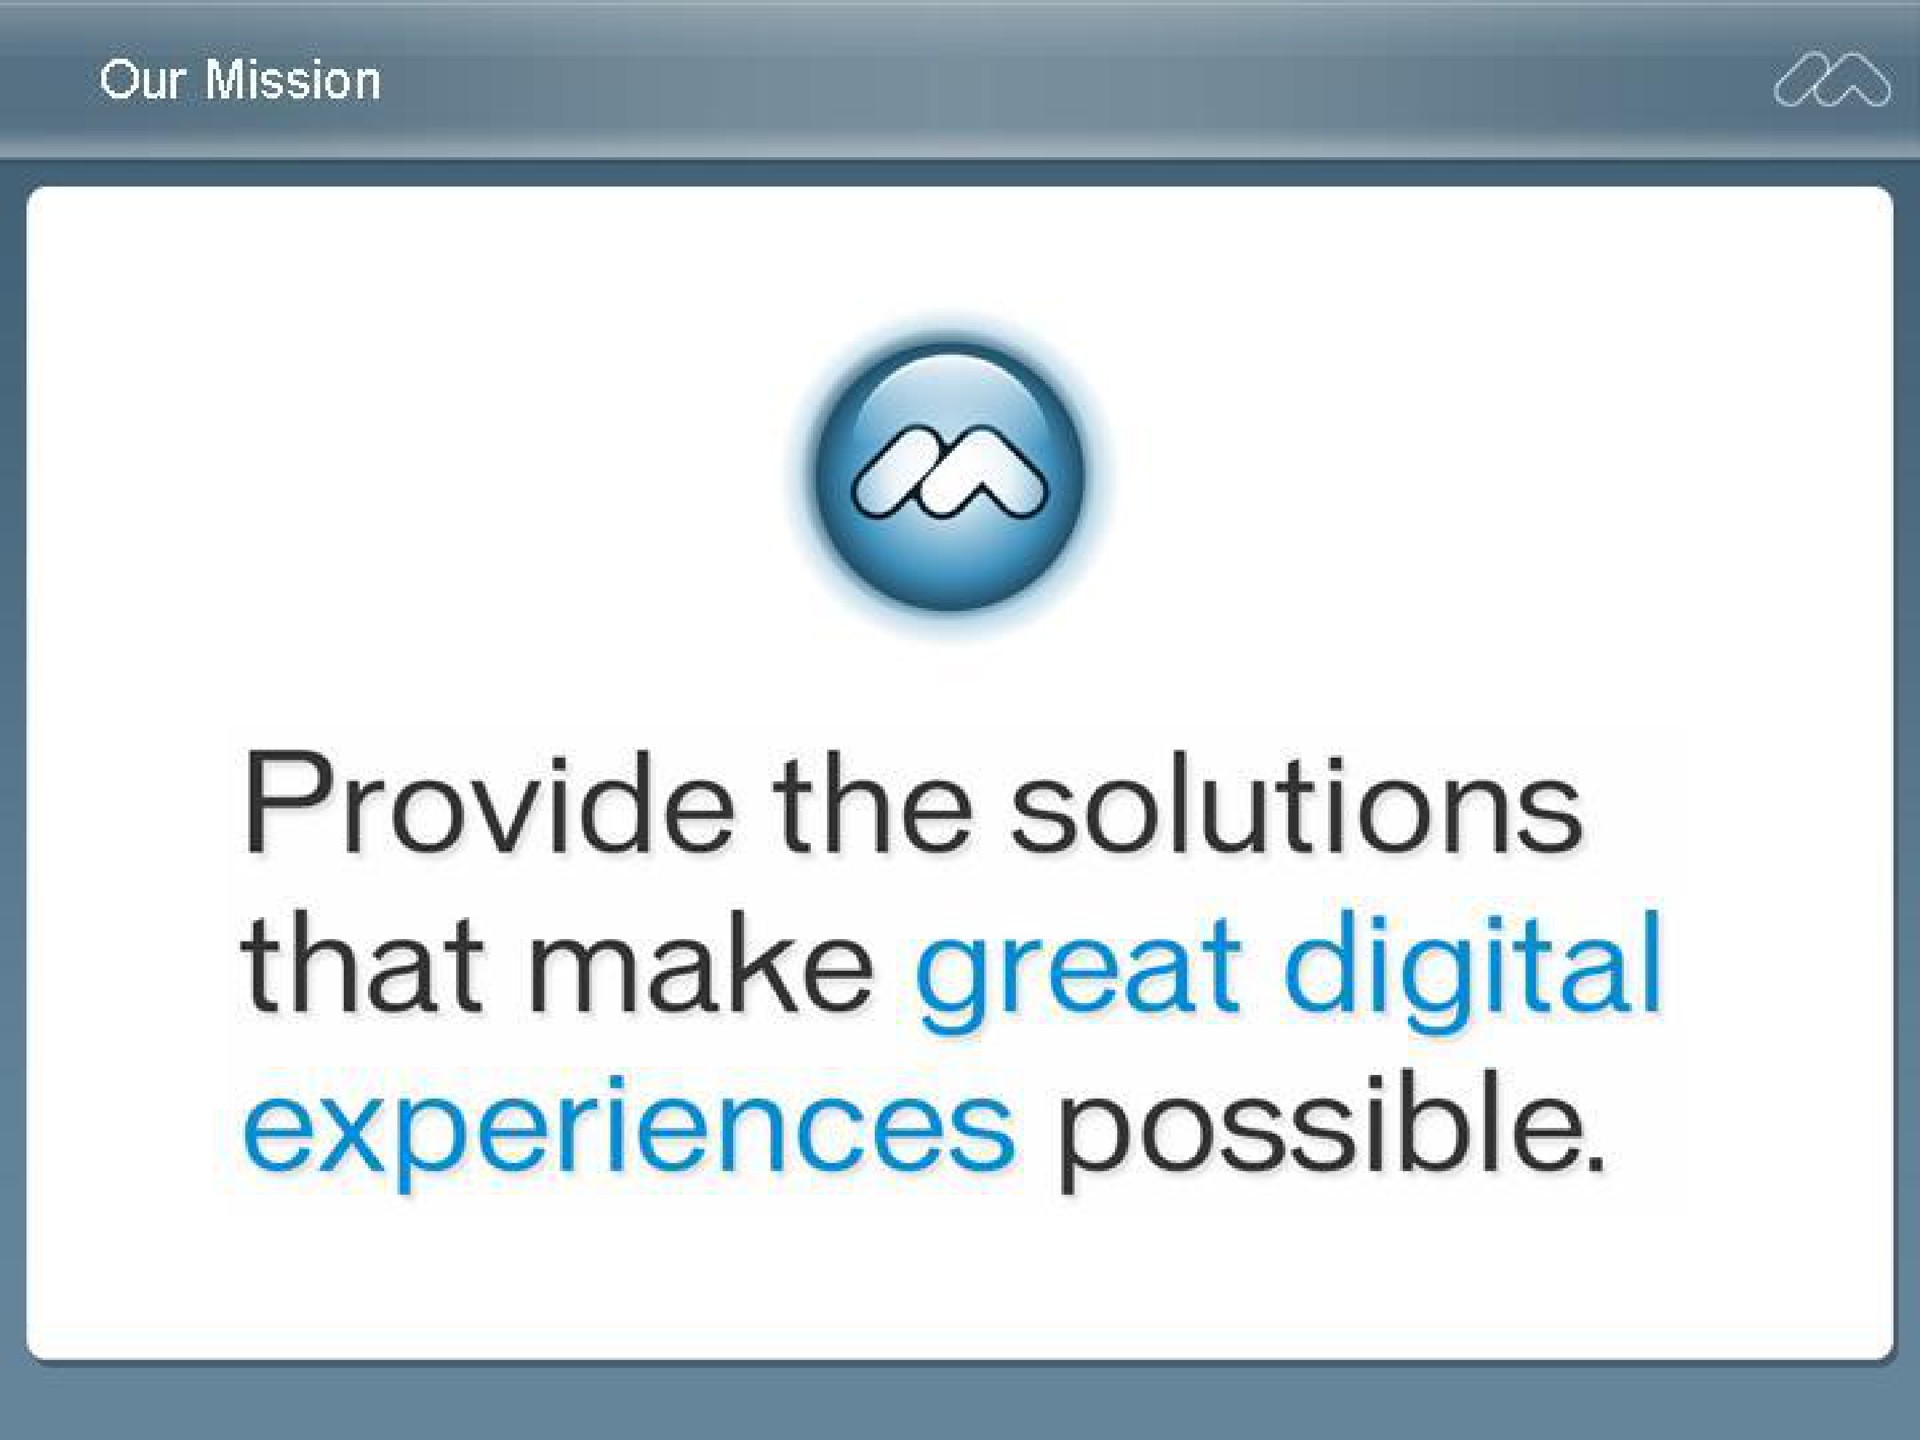 provide the solutions that make great digital experiences possible | Adobe